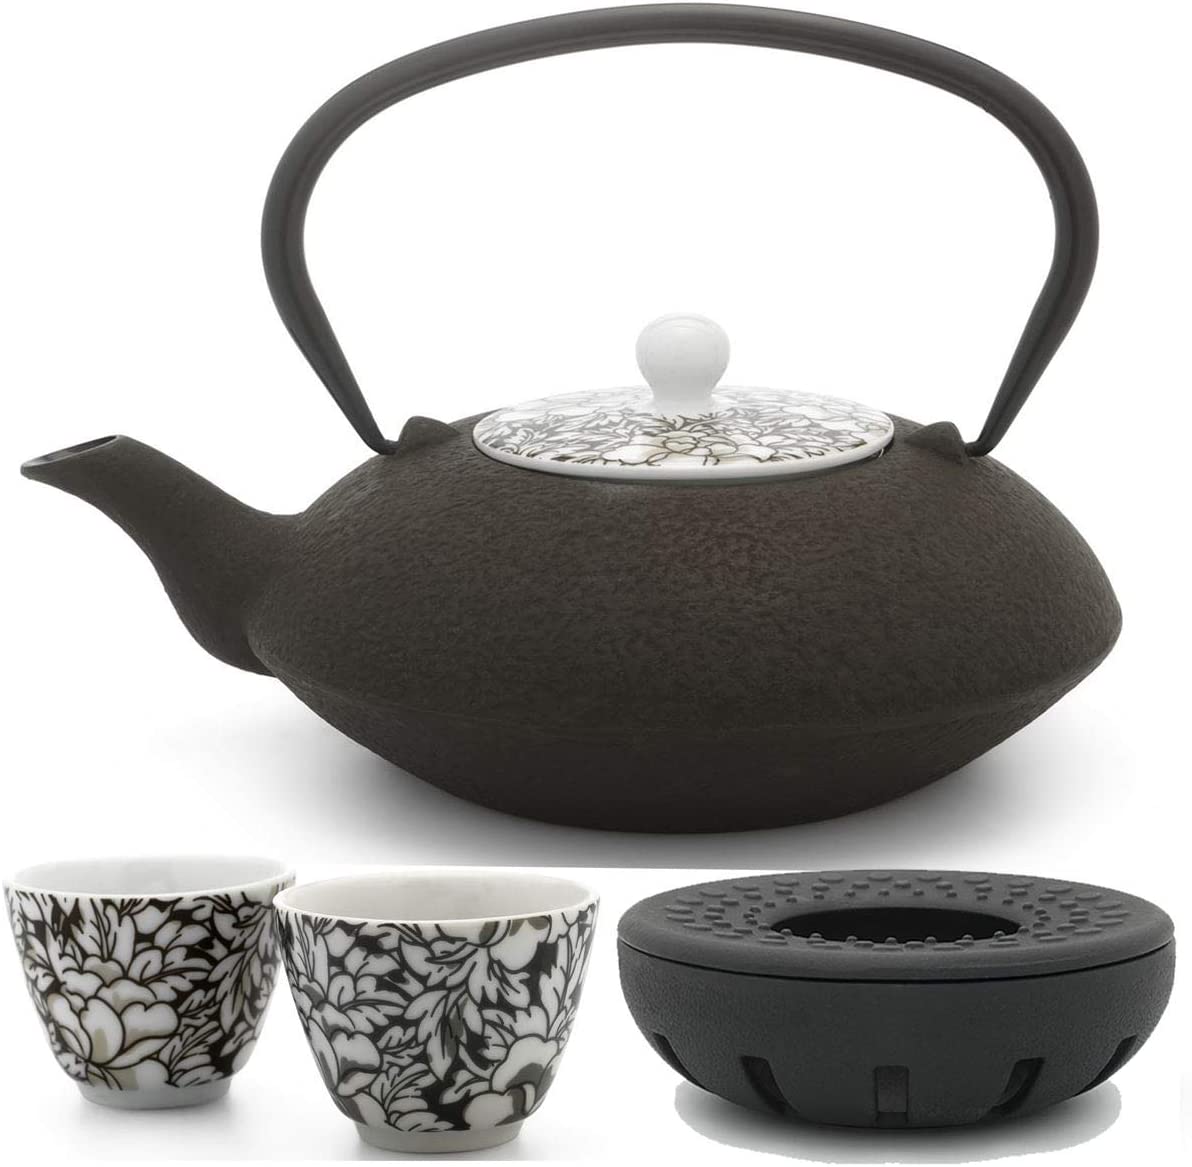 Bredemeijer Asian Cast Iron Teapot Set Brown 1.2 Litres with Tea Filter Strainer and Cast Iron Teapot Warmer Including Tea Cup Porcelain